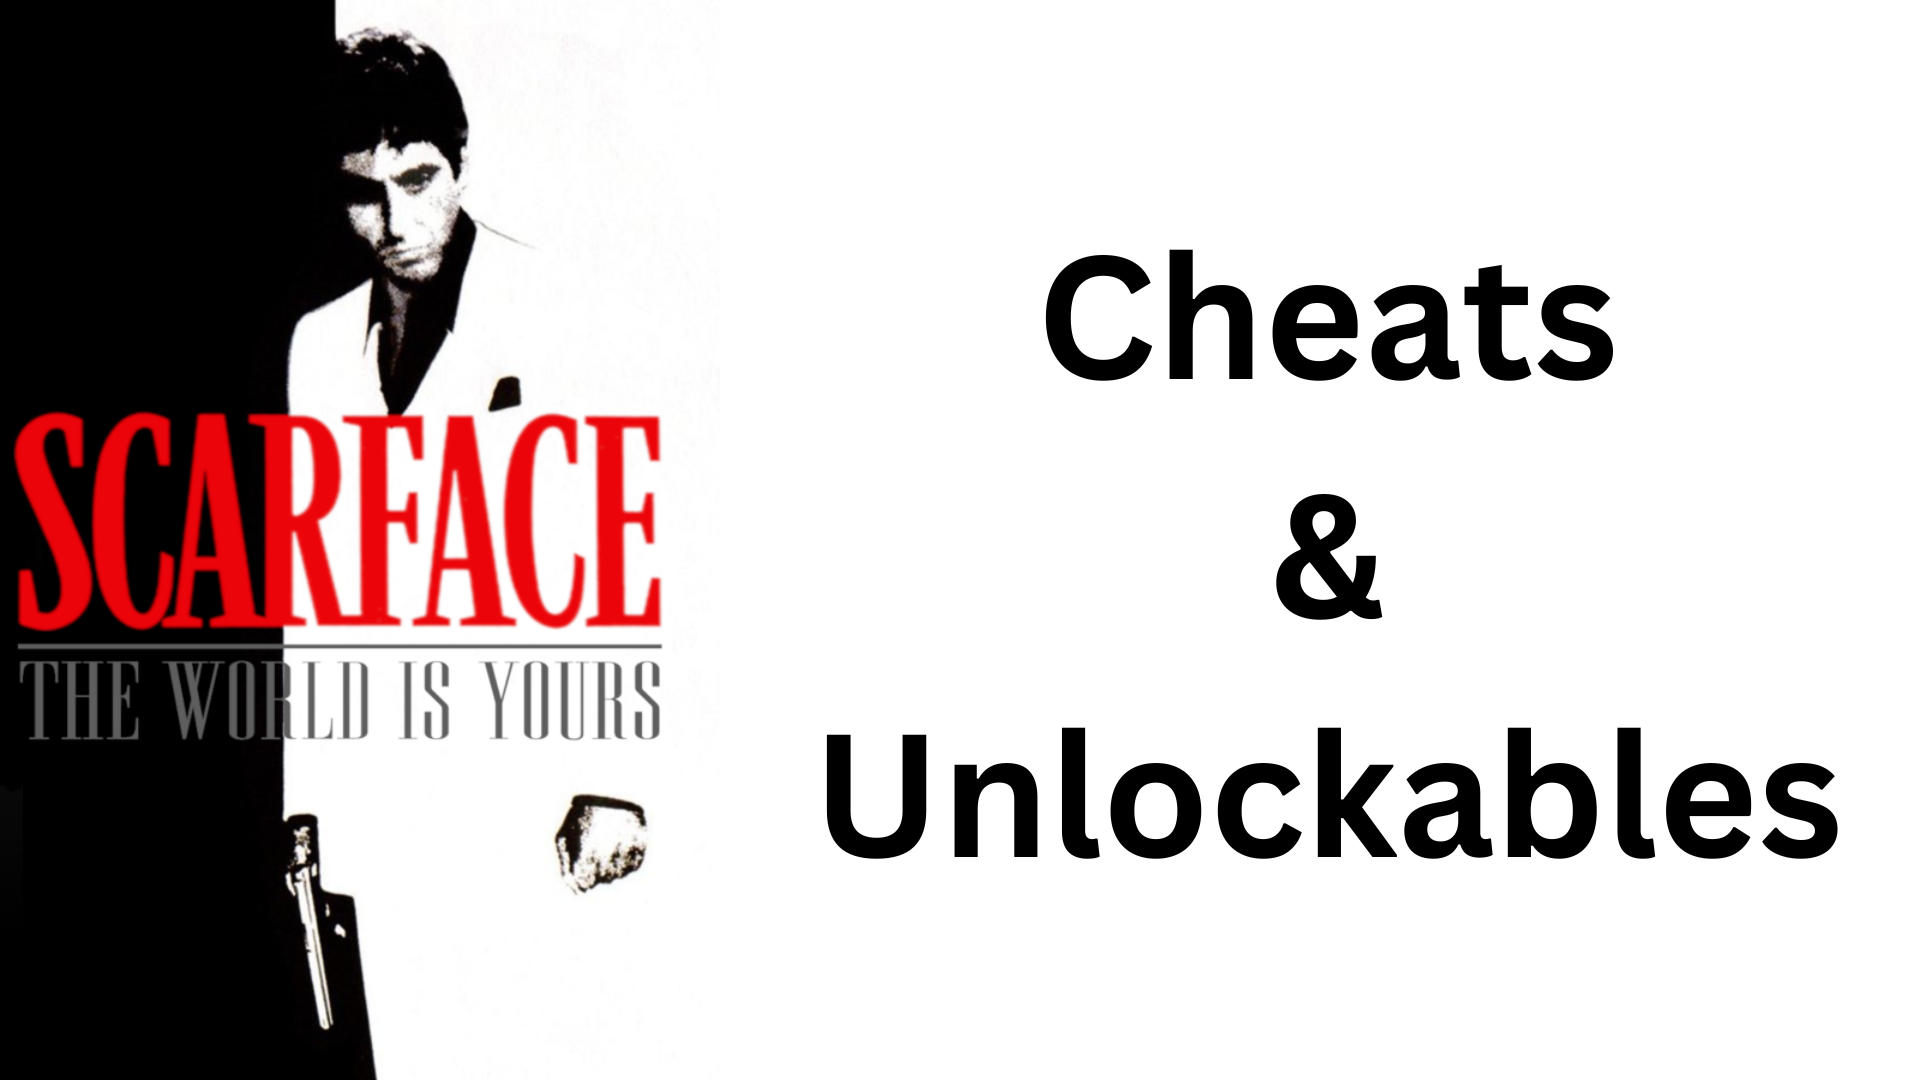 scarface: the world is yours cheats and unlockables